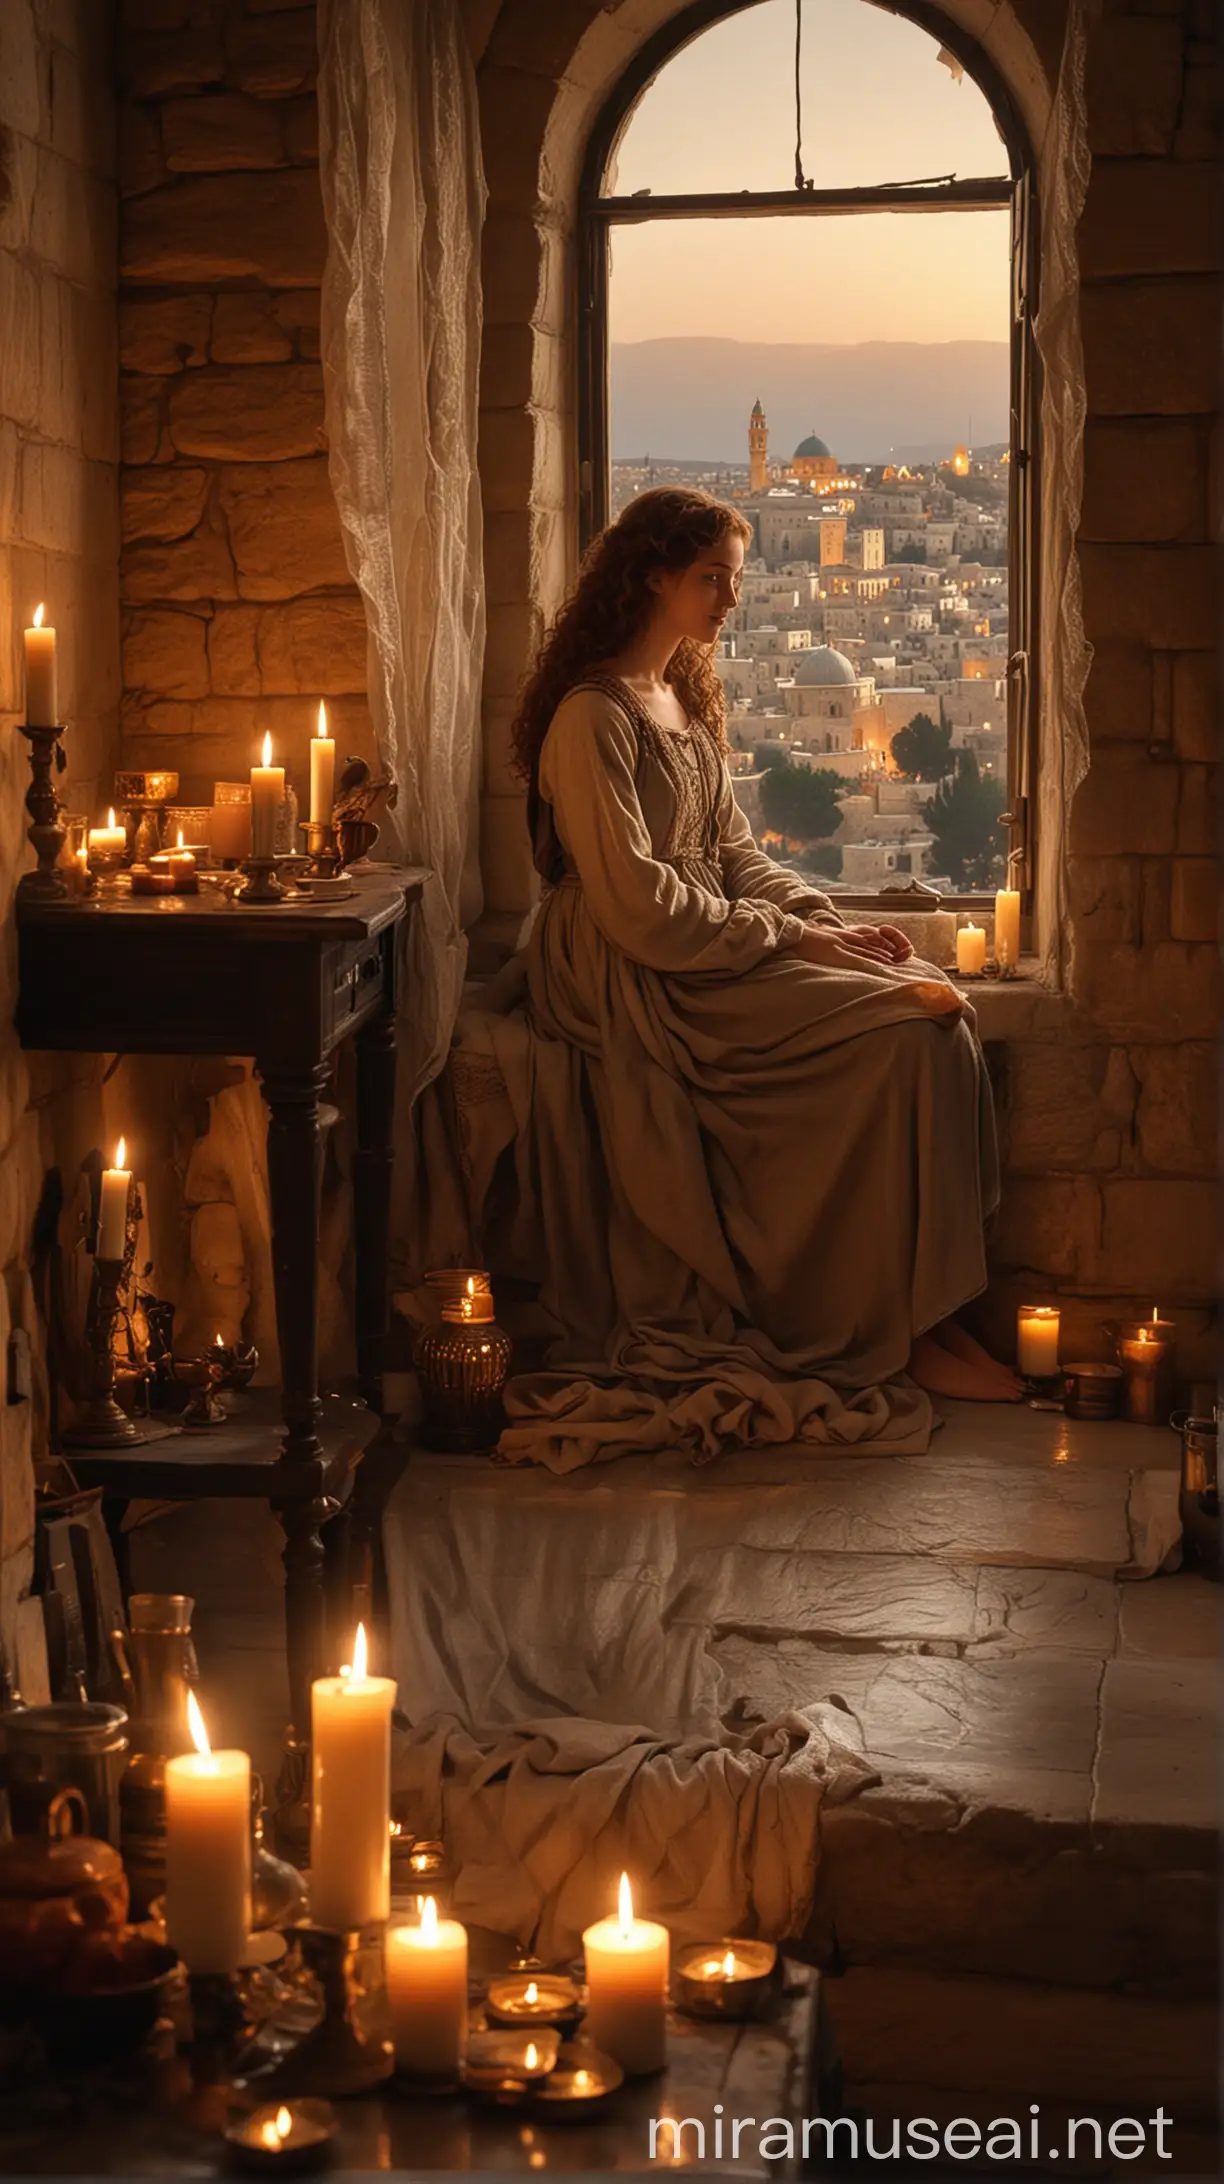 A warm and cozy domestic scene with Mary, the mother of John Mark, sitting in a dimly lit room surrounded by candles and Roman-era furnishings. Rhoda, a young girl with curly brown hair and a bright smile, is sitting at her feet, listening intently to Mary's words. Show a subtle background of Jerusalem's cityscape outside the window."In ancient world 